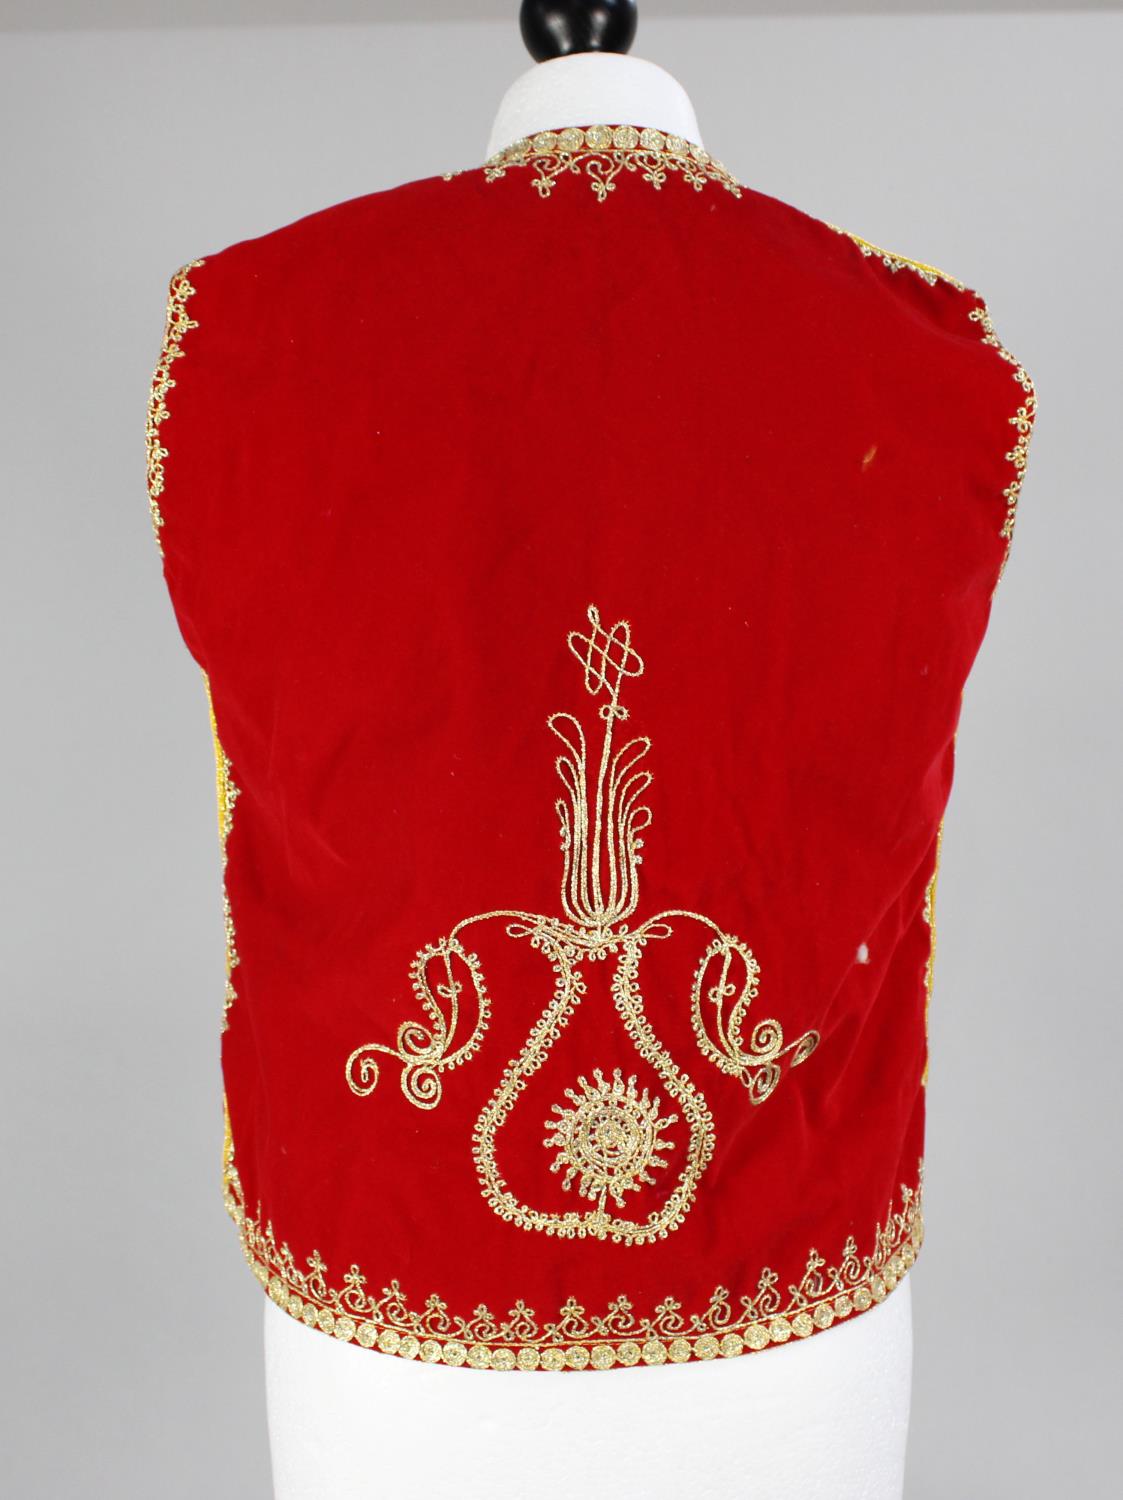 An Embroidered Chinese Waistcoat - Image 3 of 3